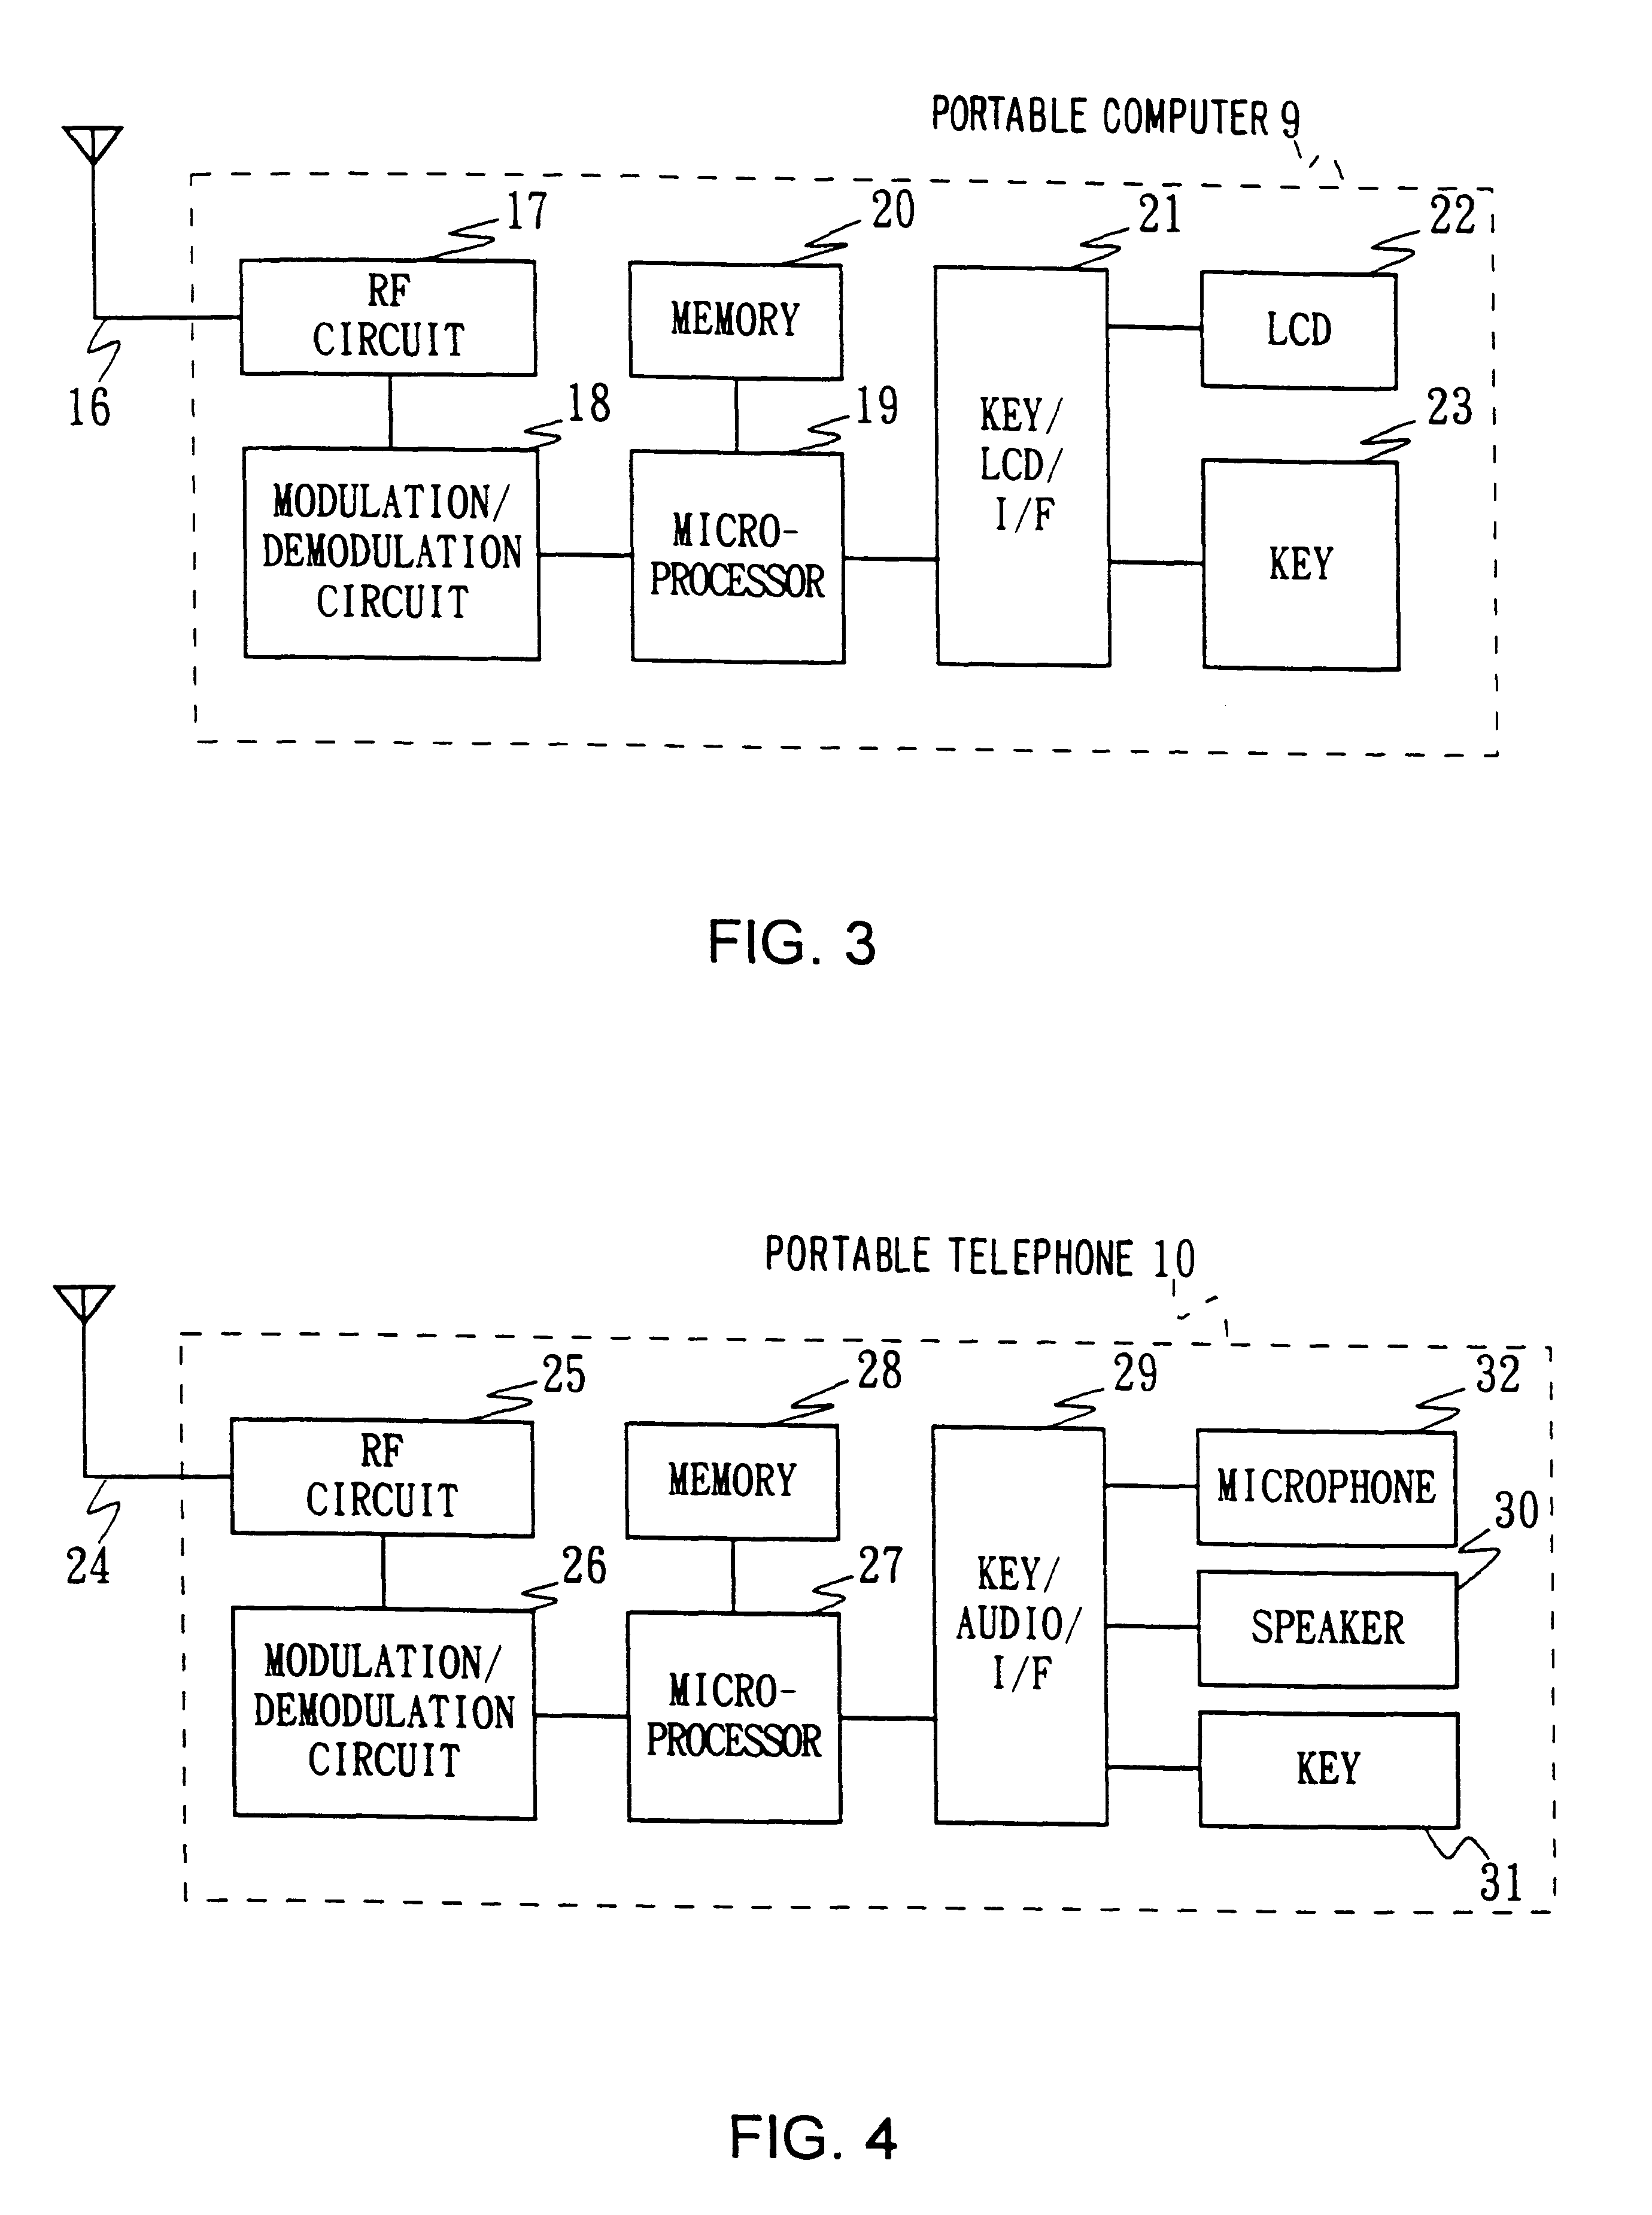 Electronic mail system, computer device, and remote notification method